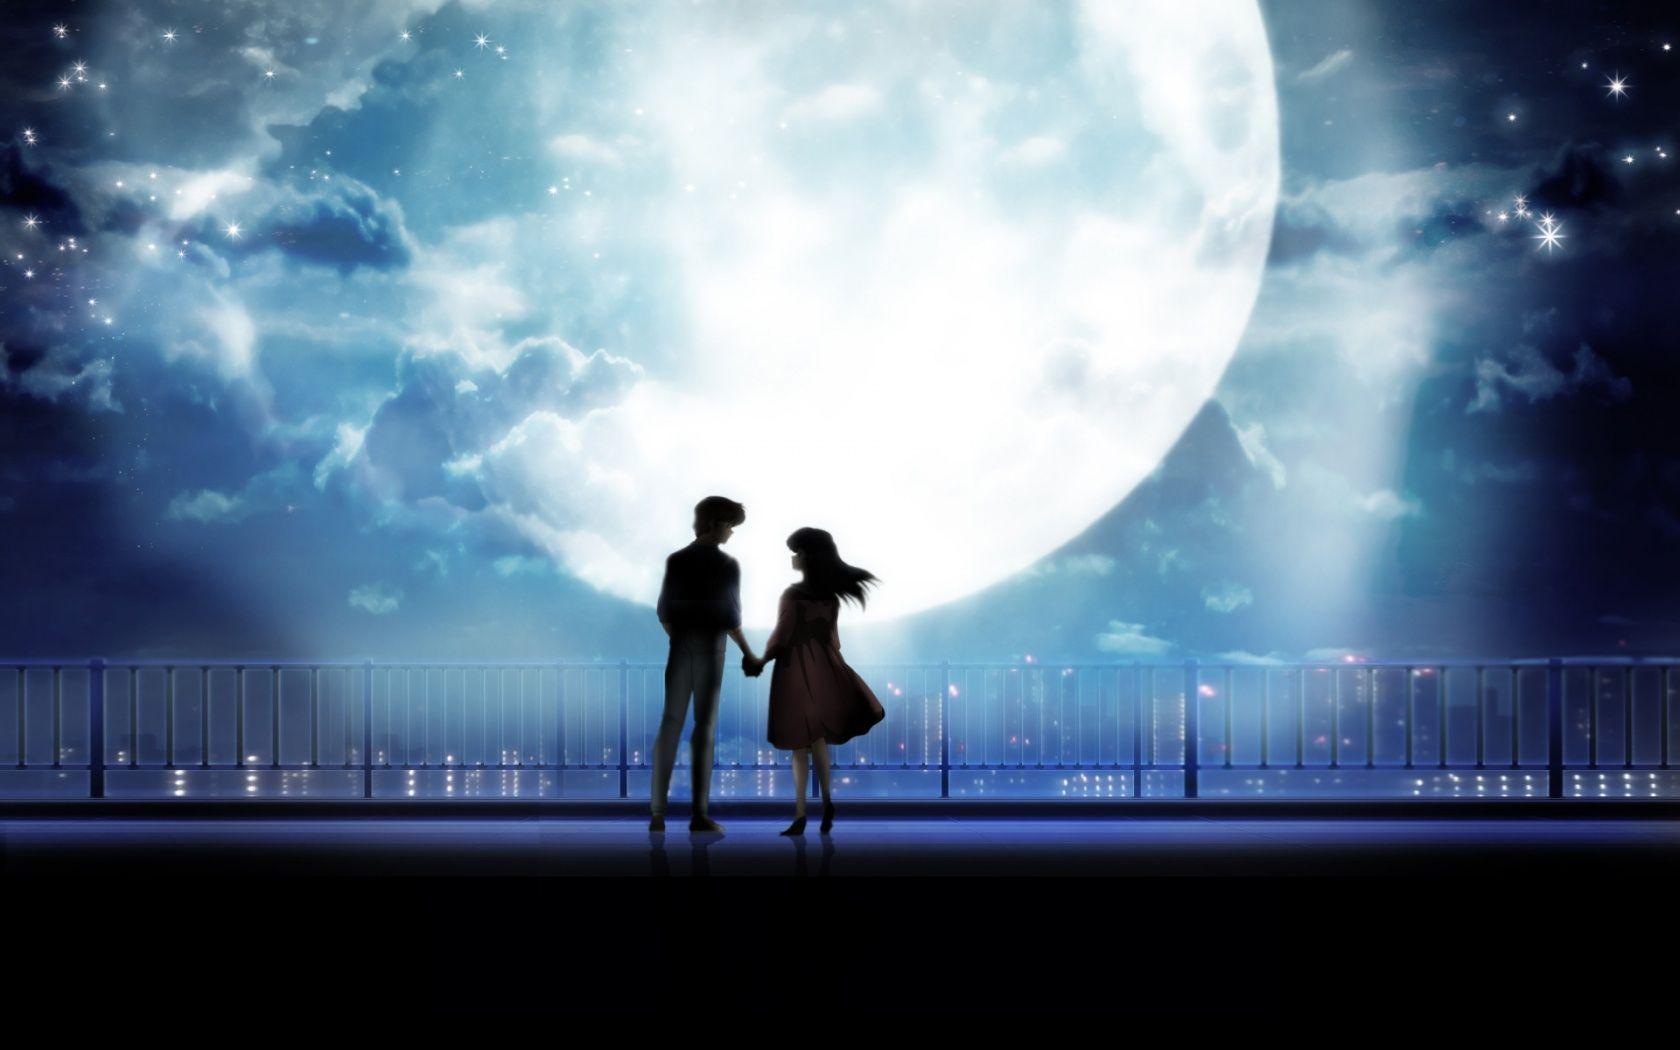 Holding Hands Romantic Anime Wallpapers - Top Free Holding ...